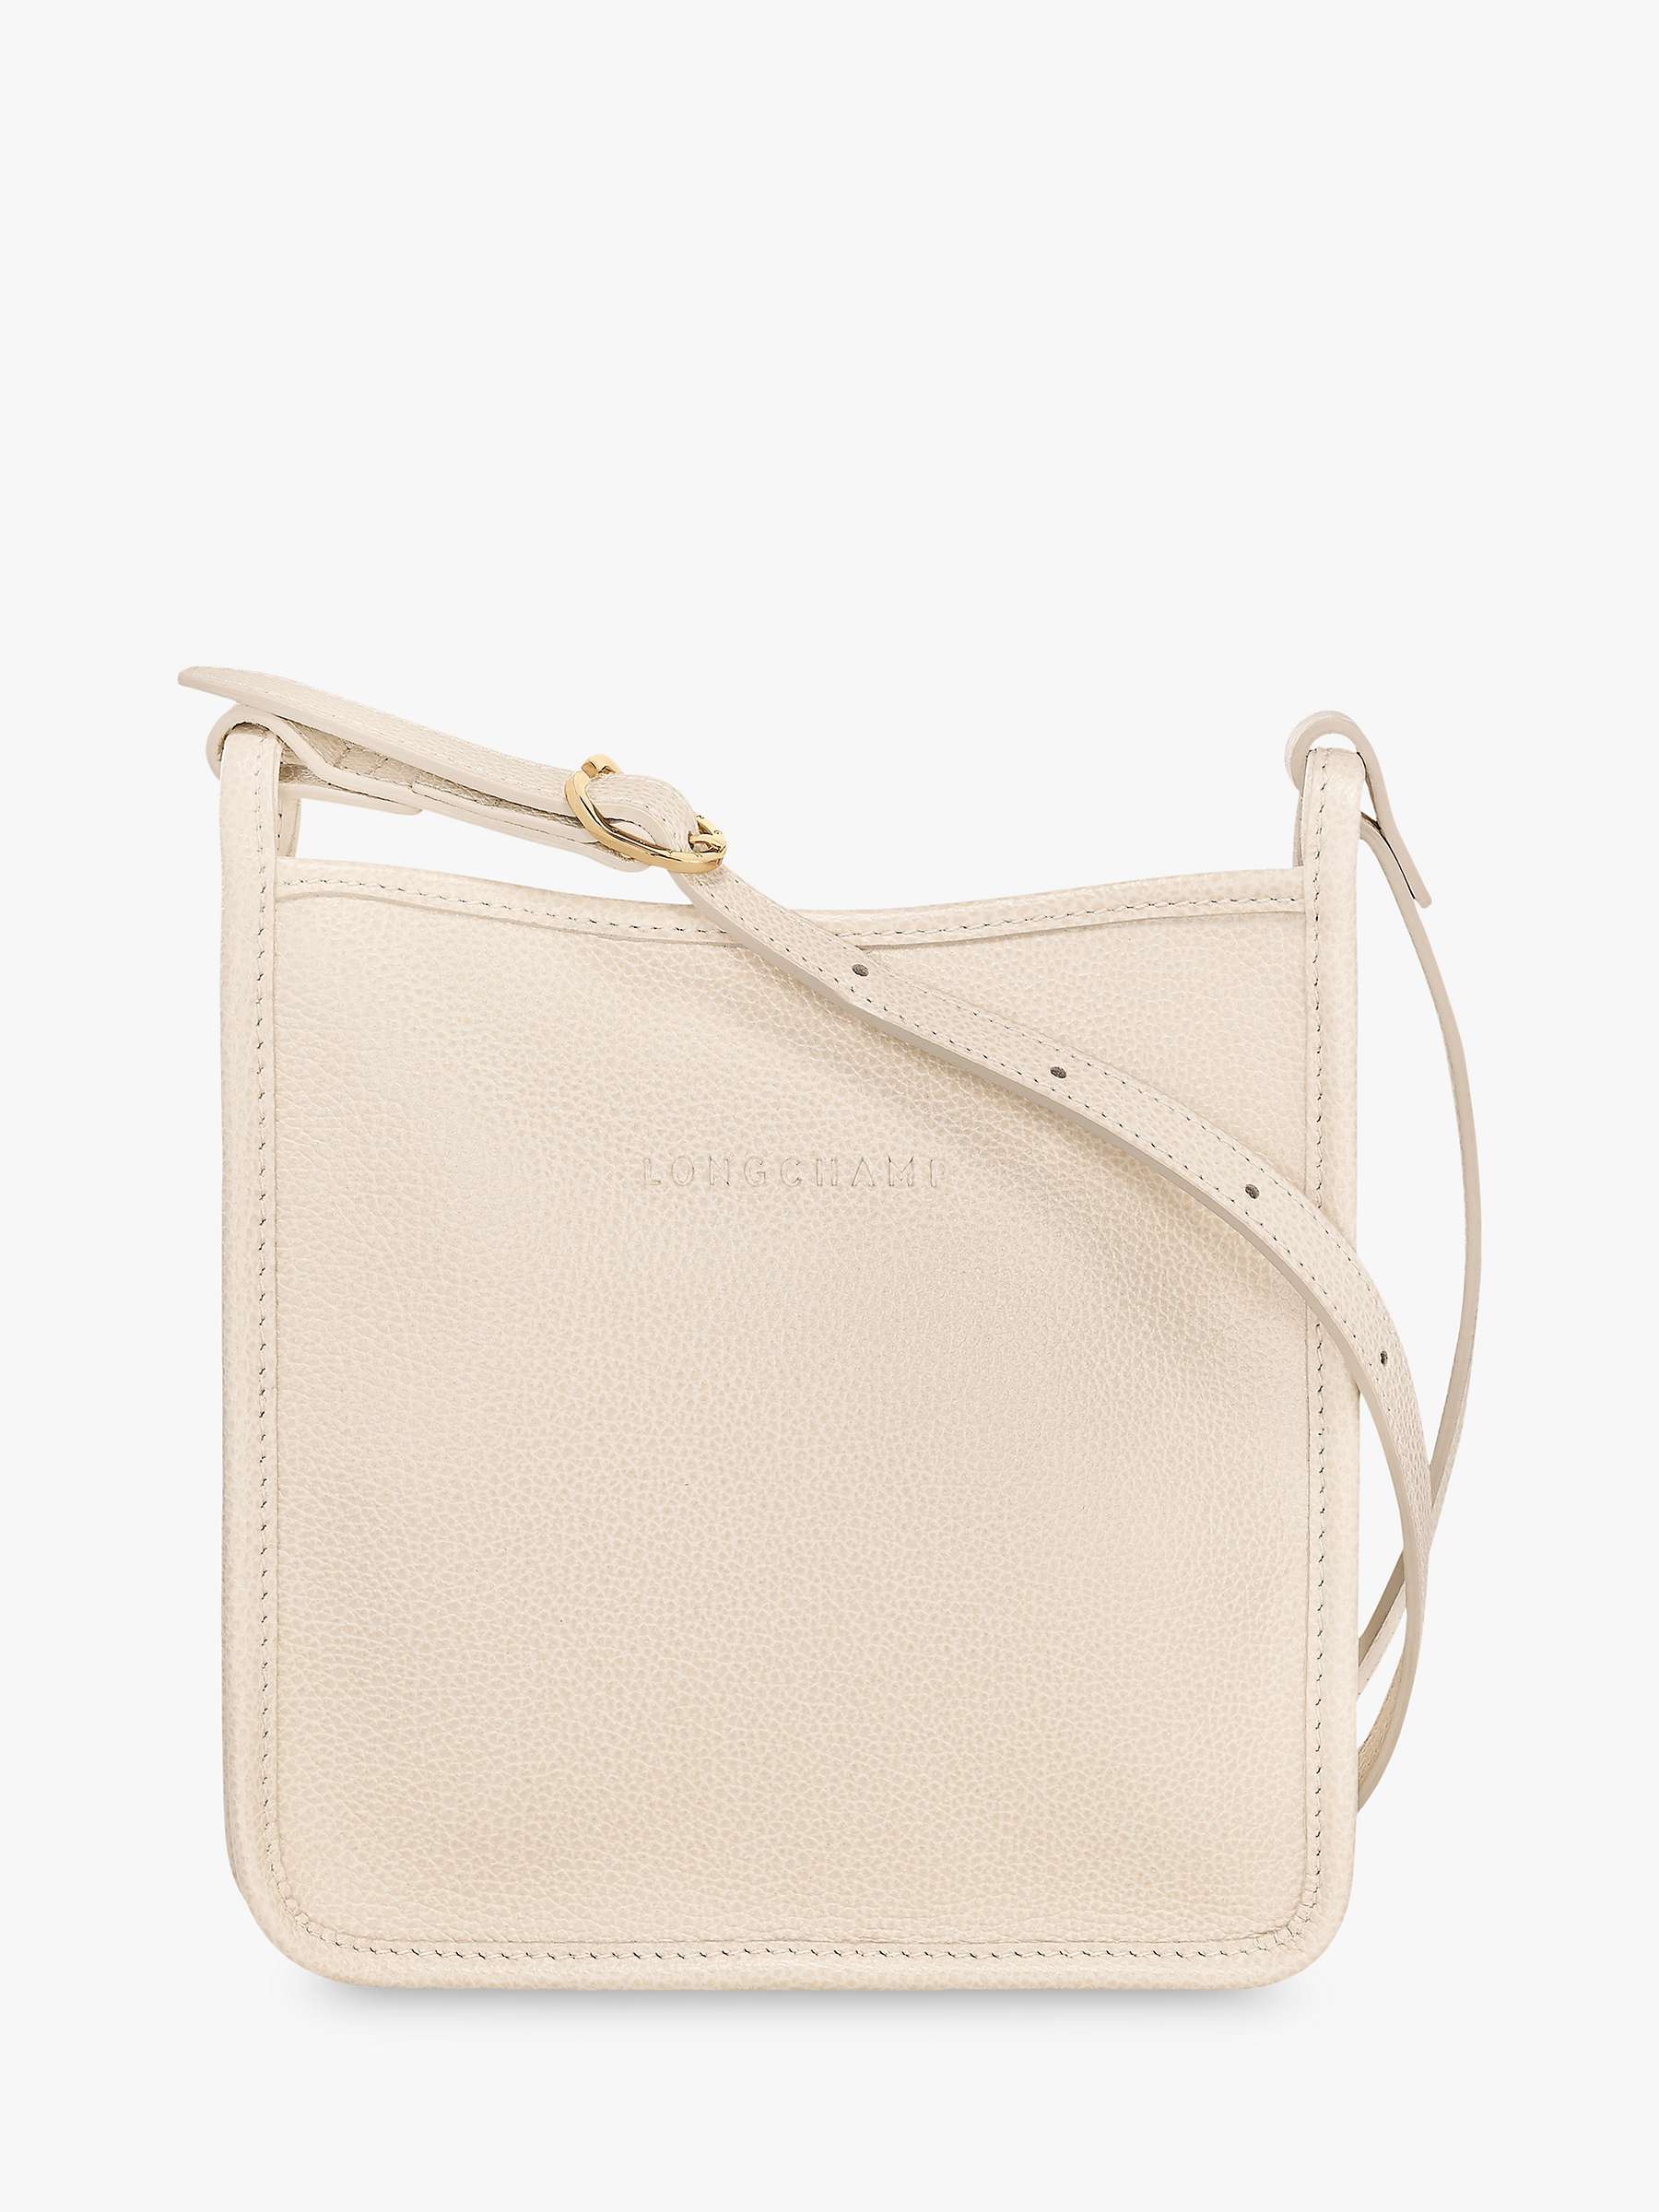 Buy Longchamp Le Foulonne Small Leather Cross Body Bag, Paper Online at johnlewis.com